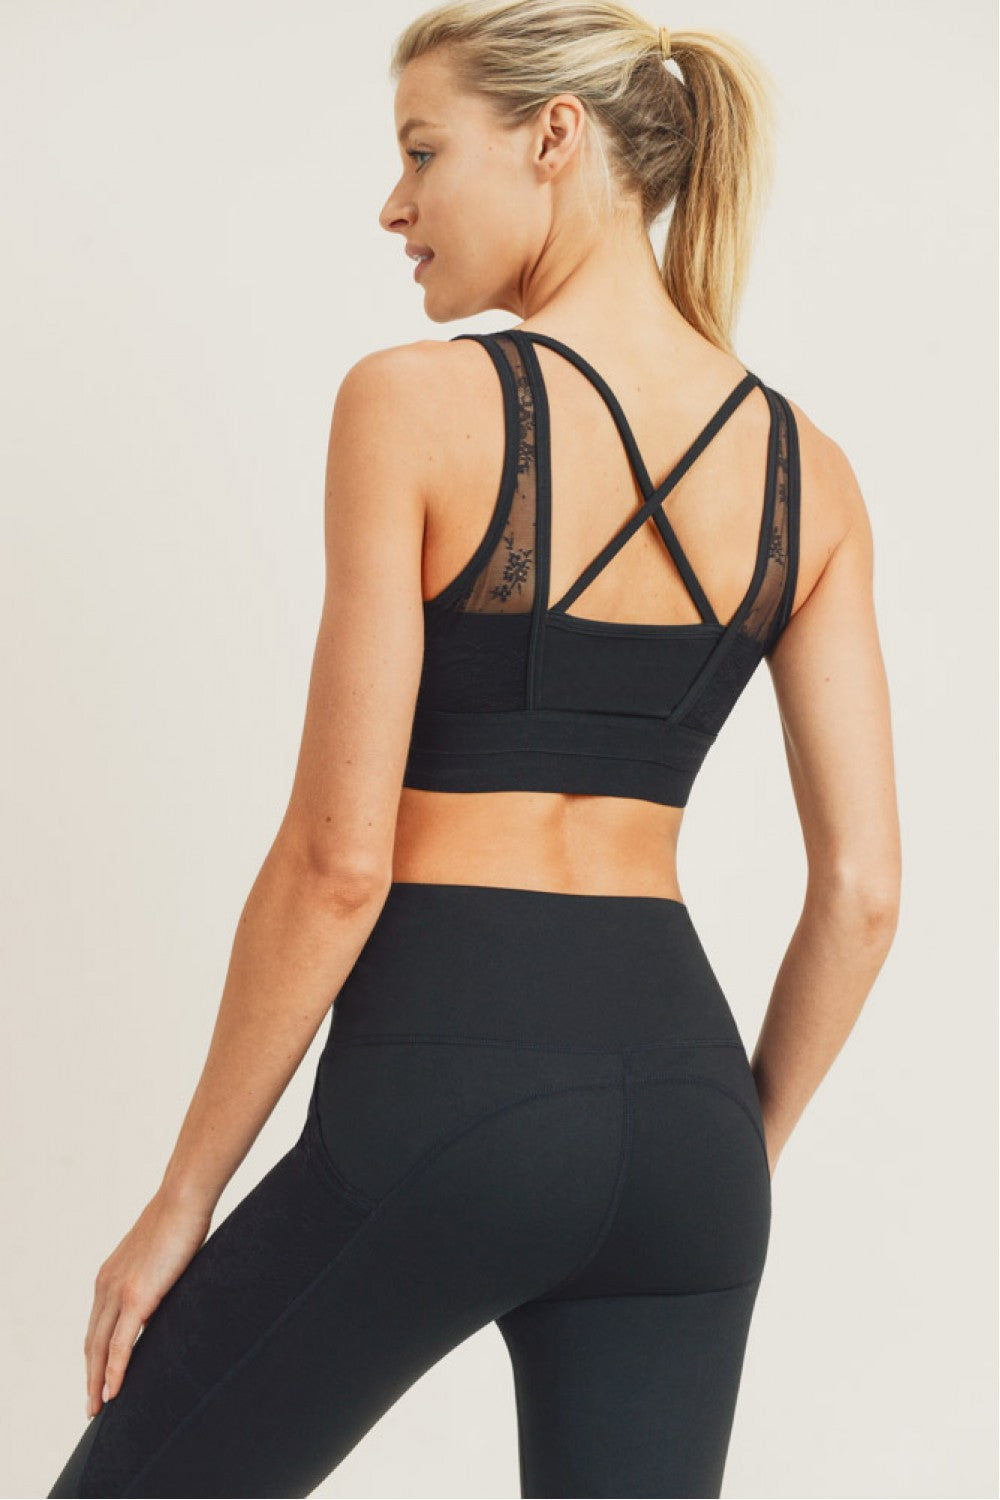 FLORAL LACE MESH X-BACK SPORTS BRA - AT2886